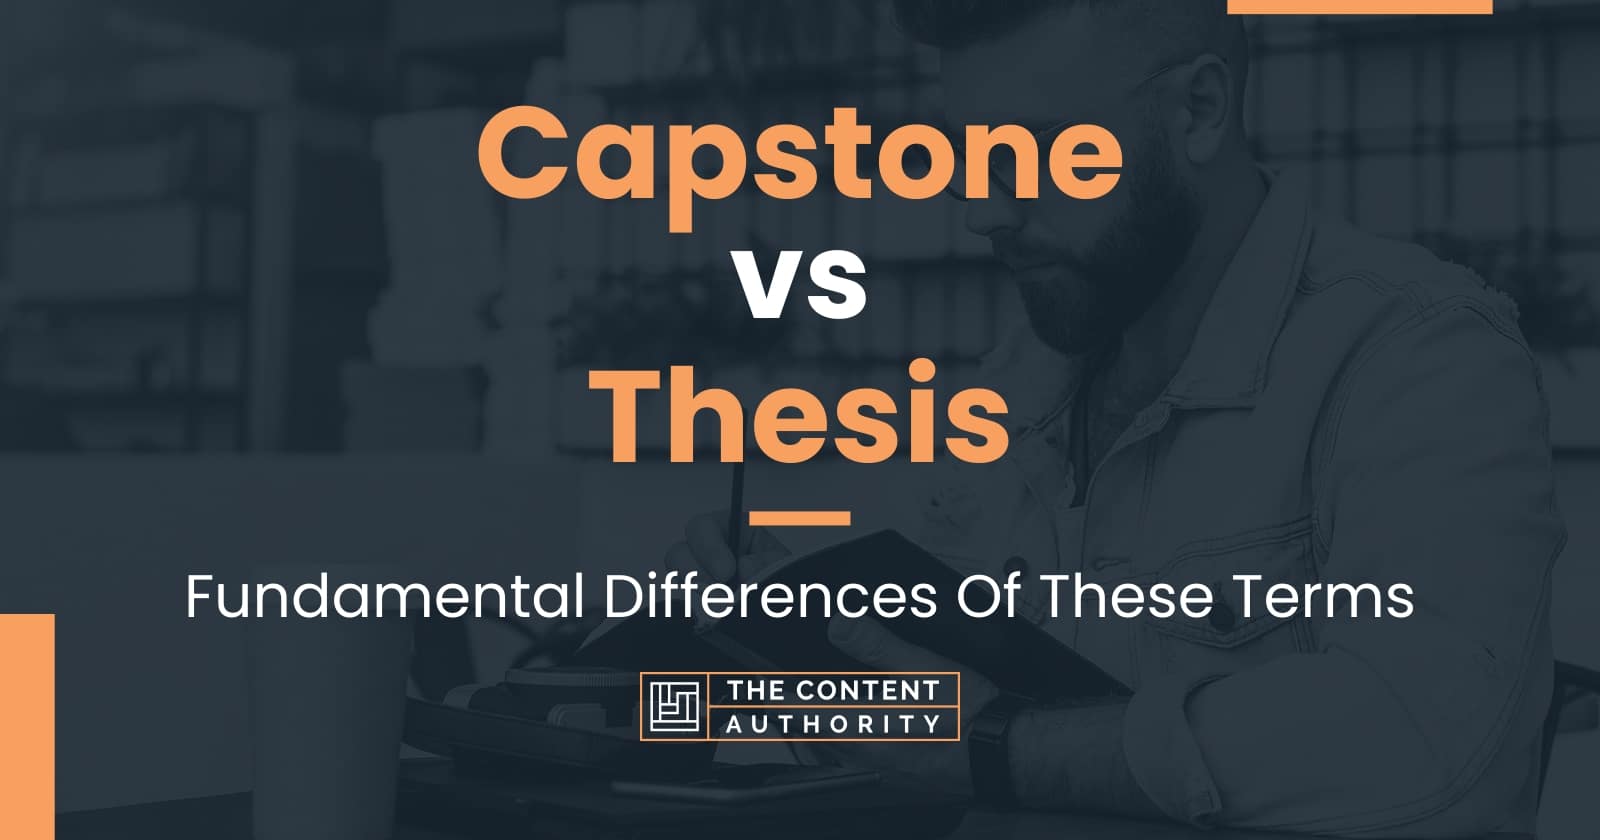 is capstone and thesis the same